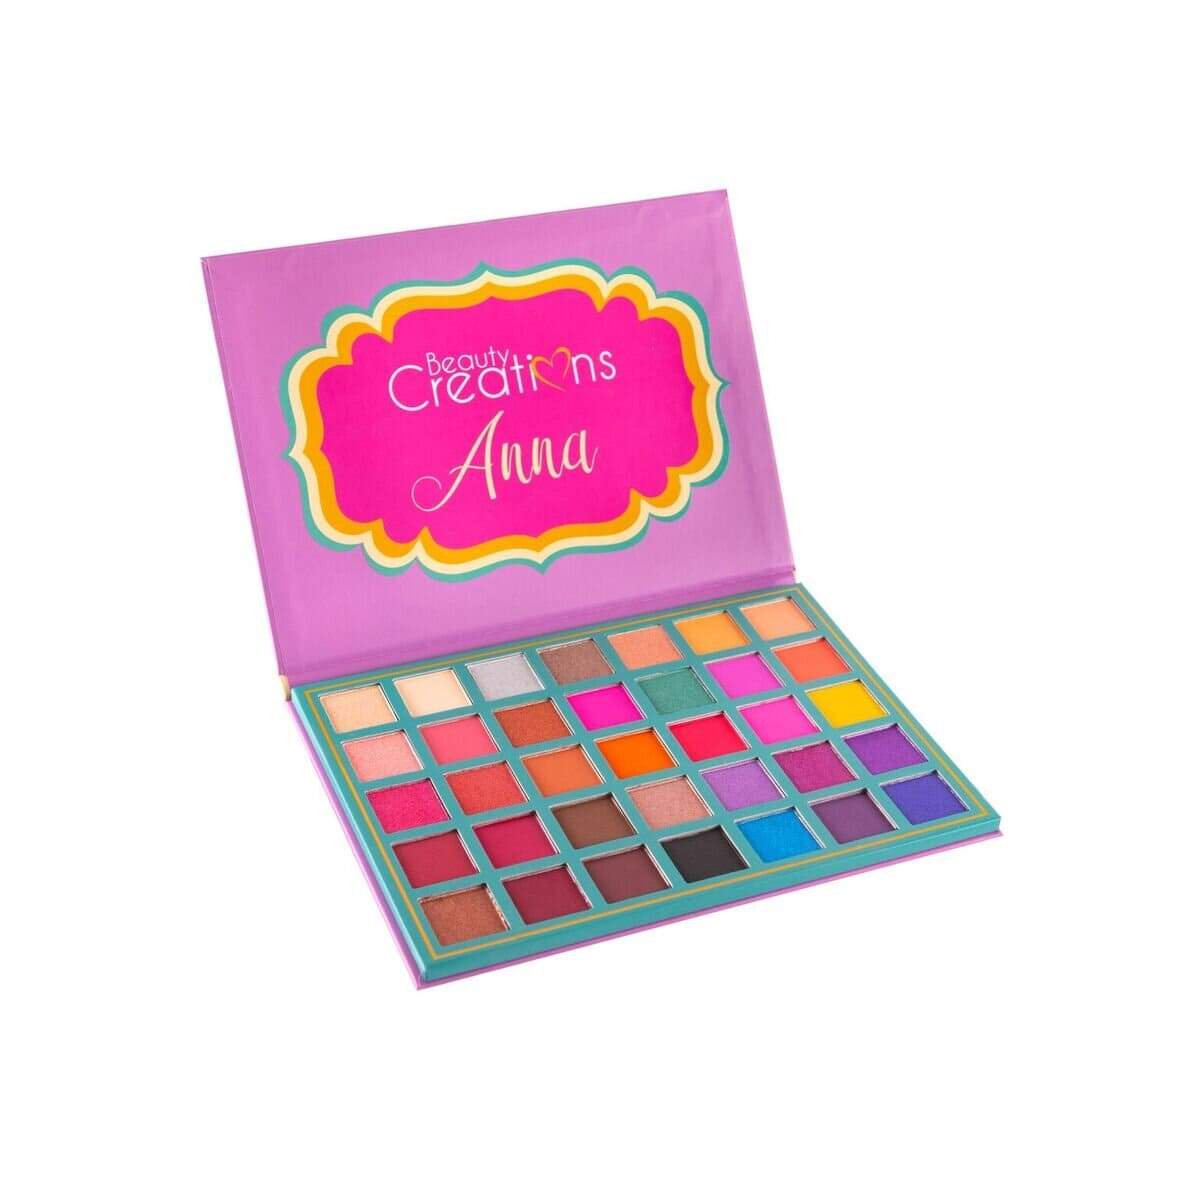 ANNA 35 COLOR EYESHADOW PALETTE - BEAUTY CREATIONS